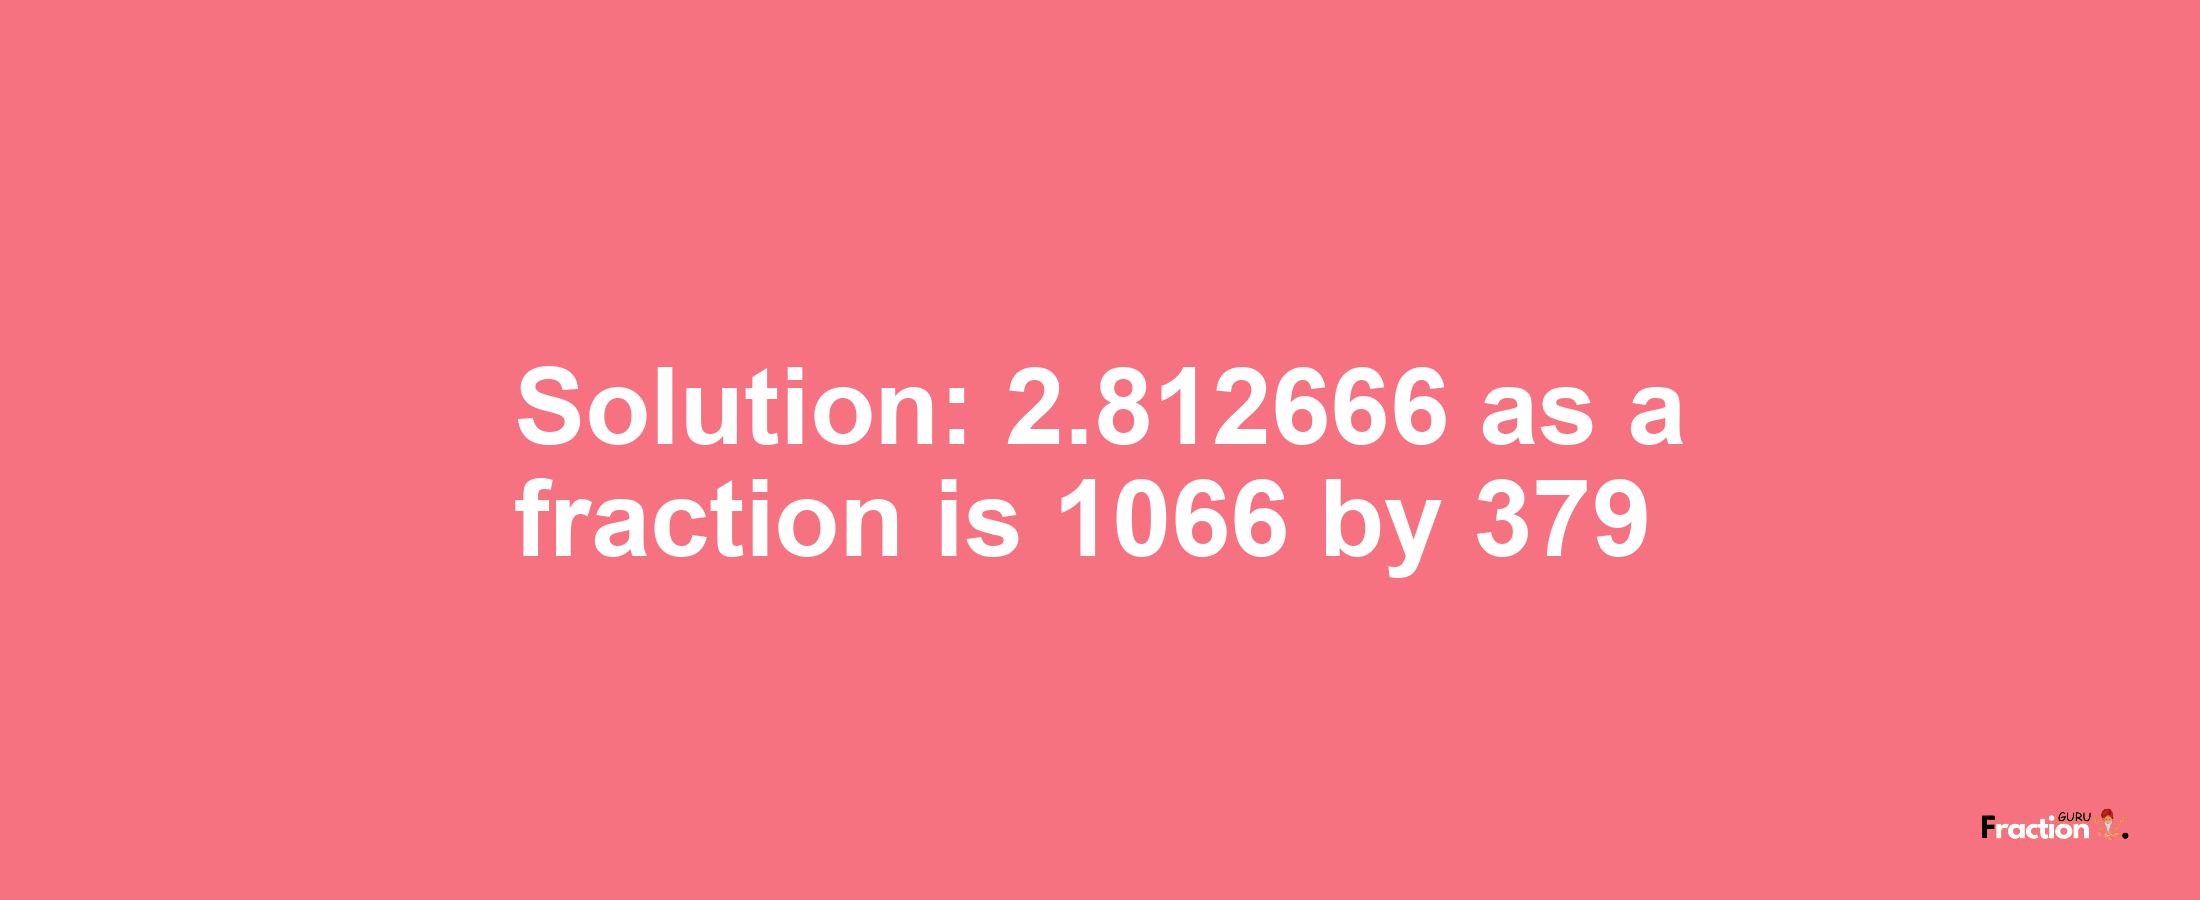 Solution:2.812666 as a fraction is 1066/379